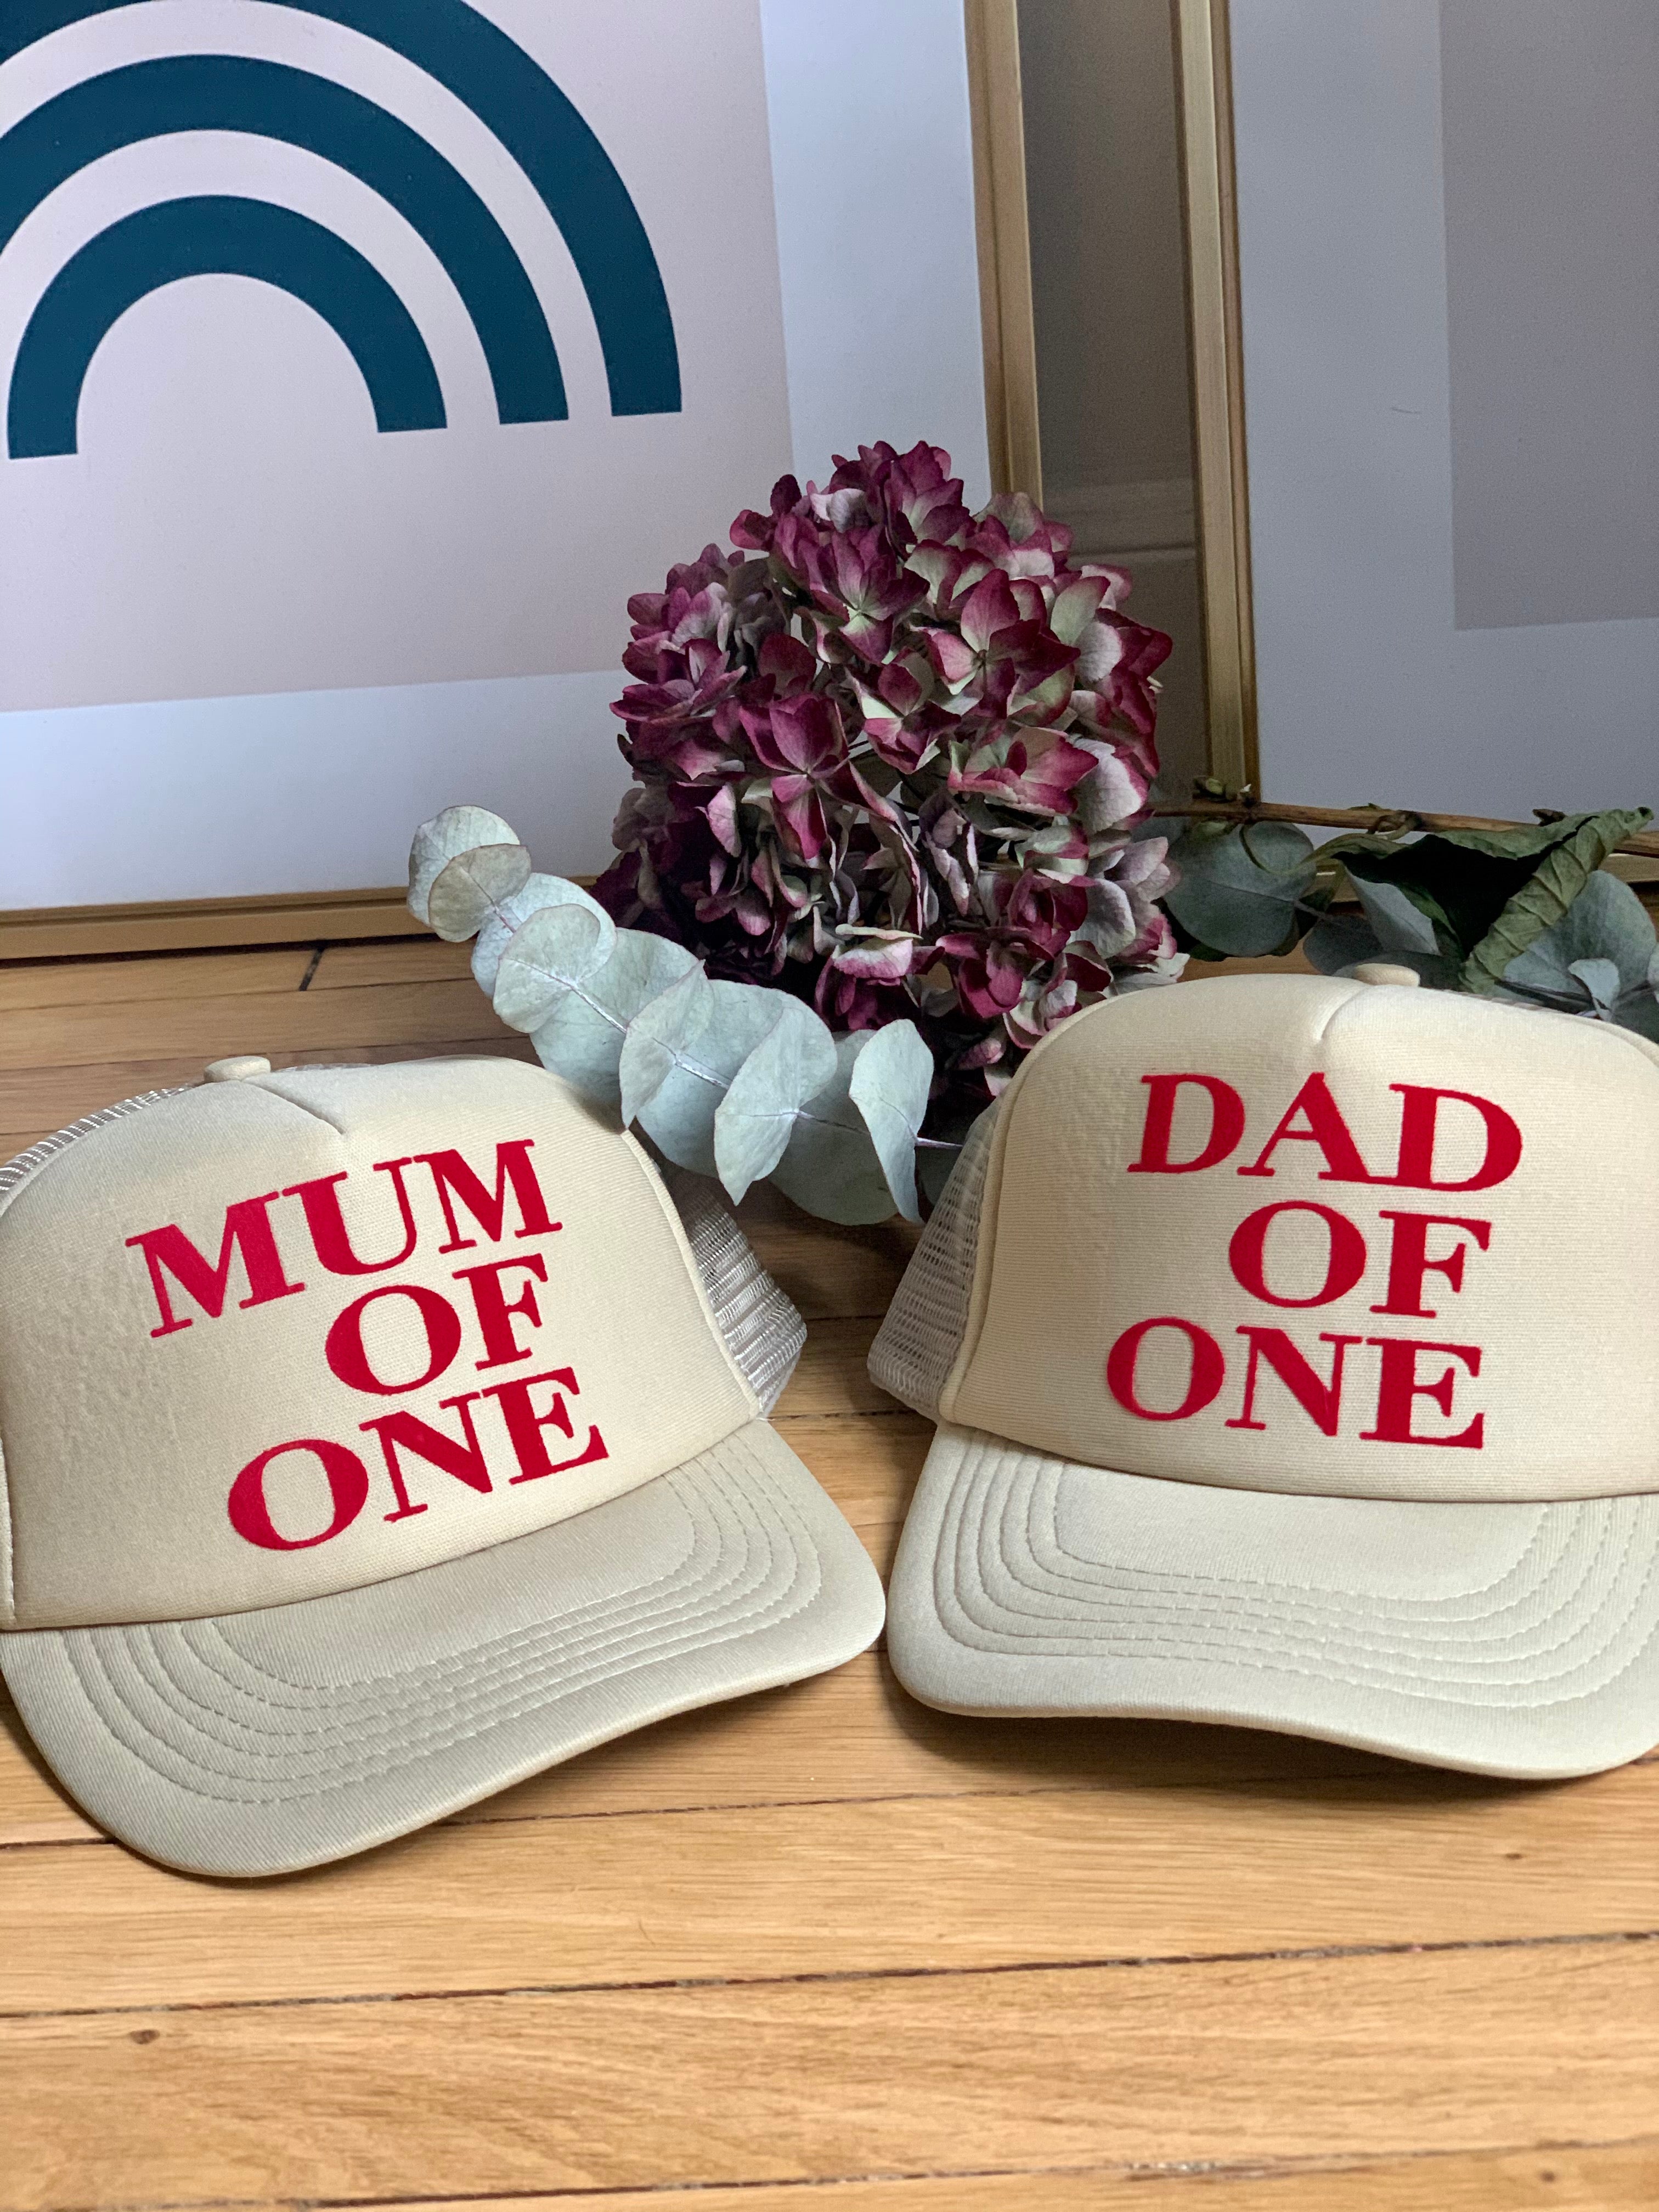 DAD OF CAP - SAND - Available for DAD OF ONE, TWO, THREE...